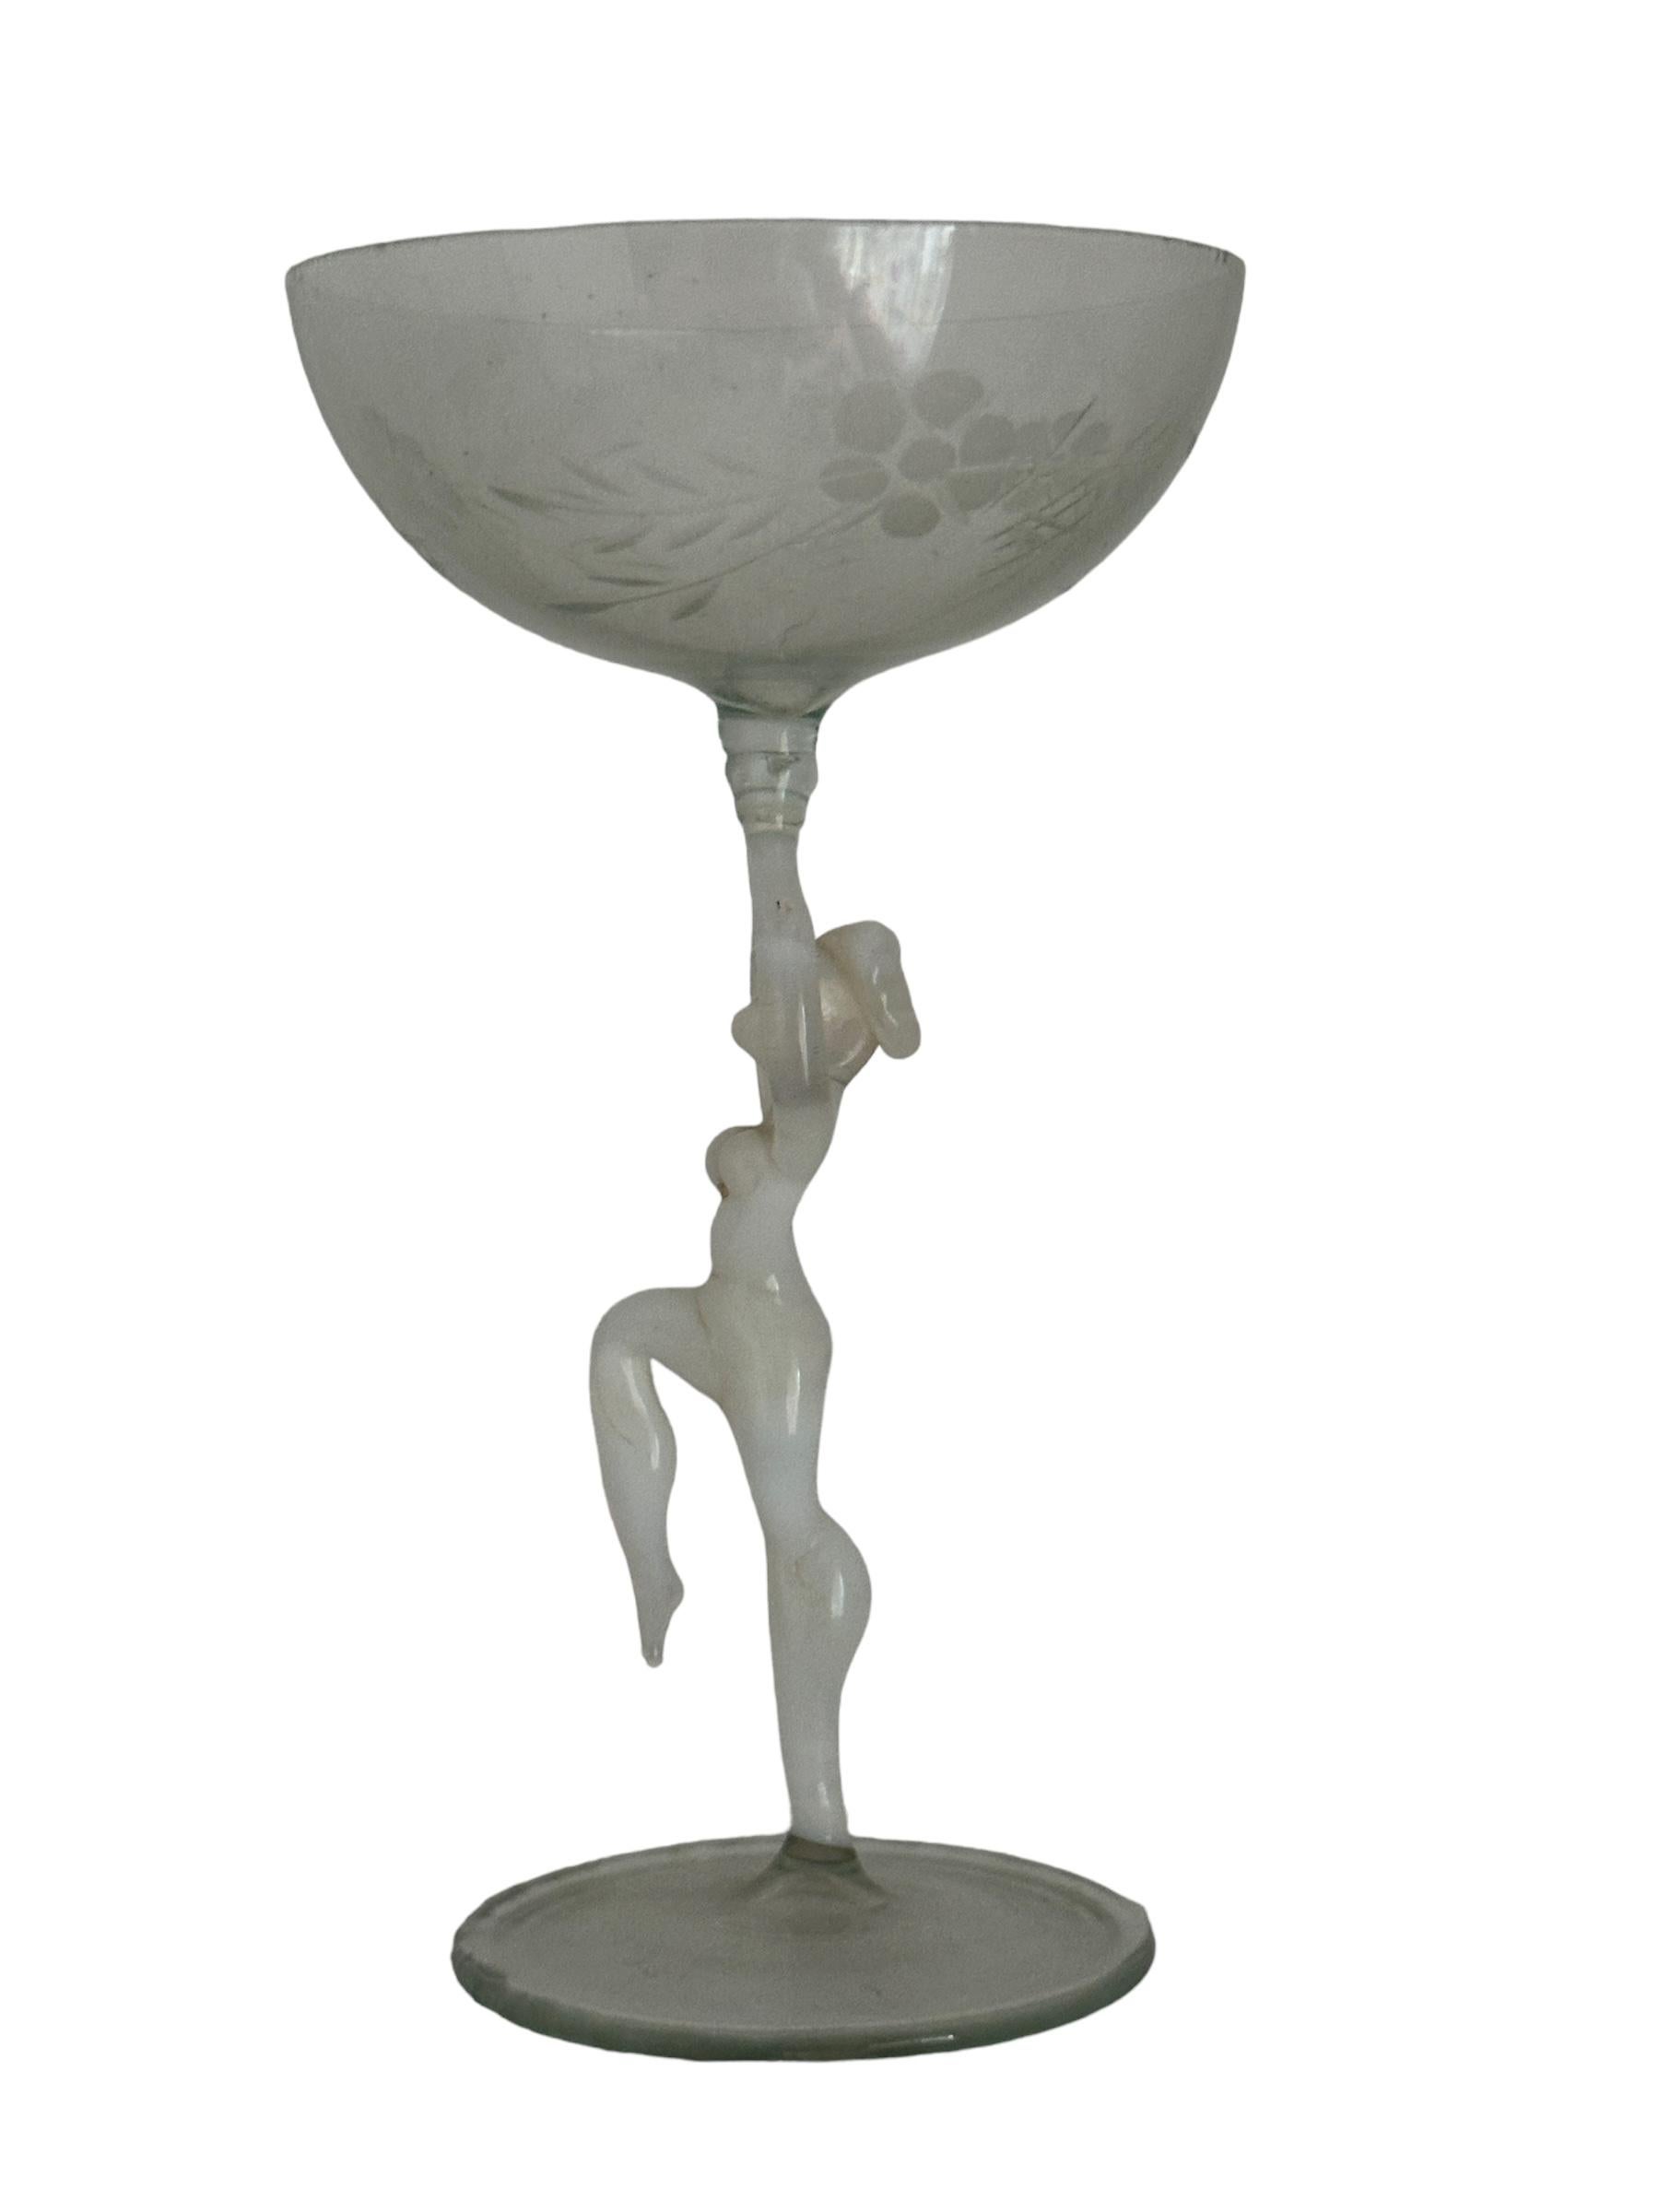 This is a beautiful single vintage stemmed liqueur glass from Austria. It features a bare women's shaft and is Bimini art style. The glass has a wonderful design, the stem depicts a nude lady in white color. The base and the top is a beautiful clear